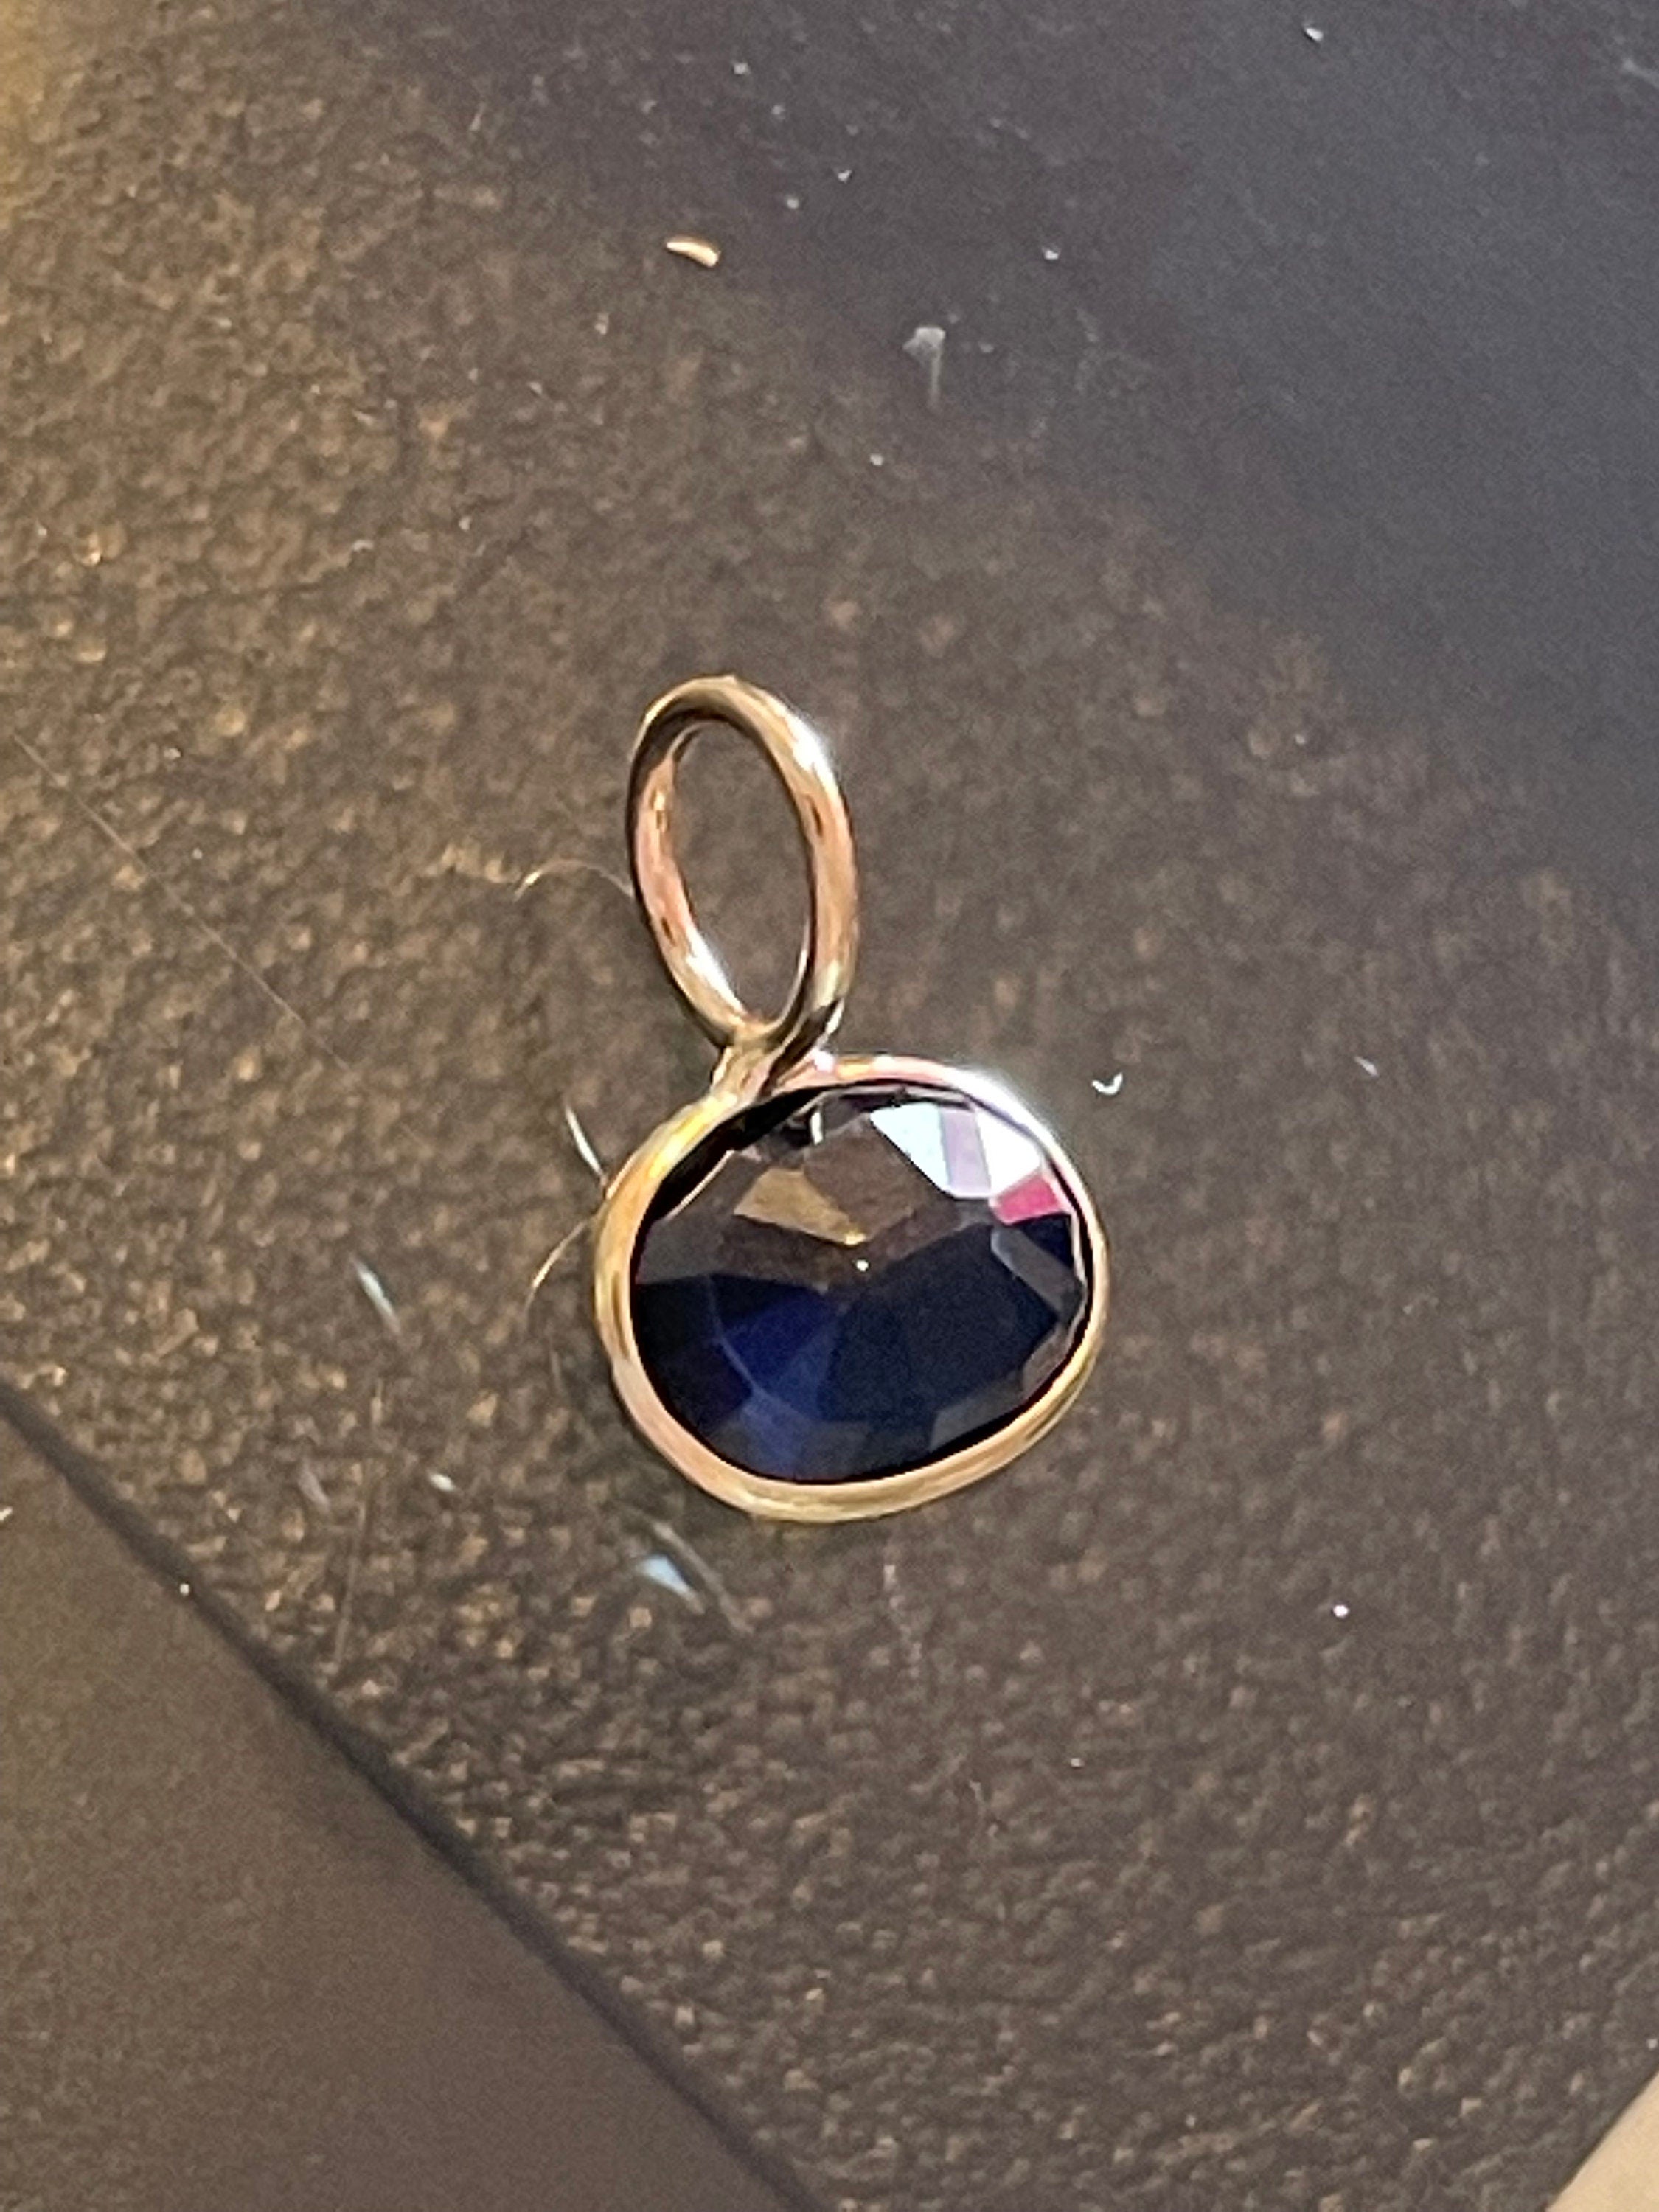 Natural Round Dark Blue Sapphire 1CT  14K Yellow Gold Bezeled Charm Pendant for Necklace 8x11mm